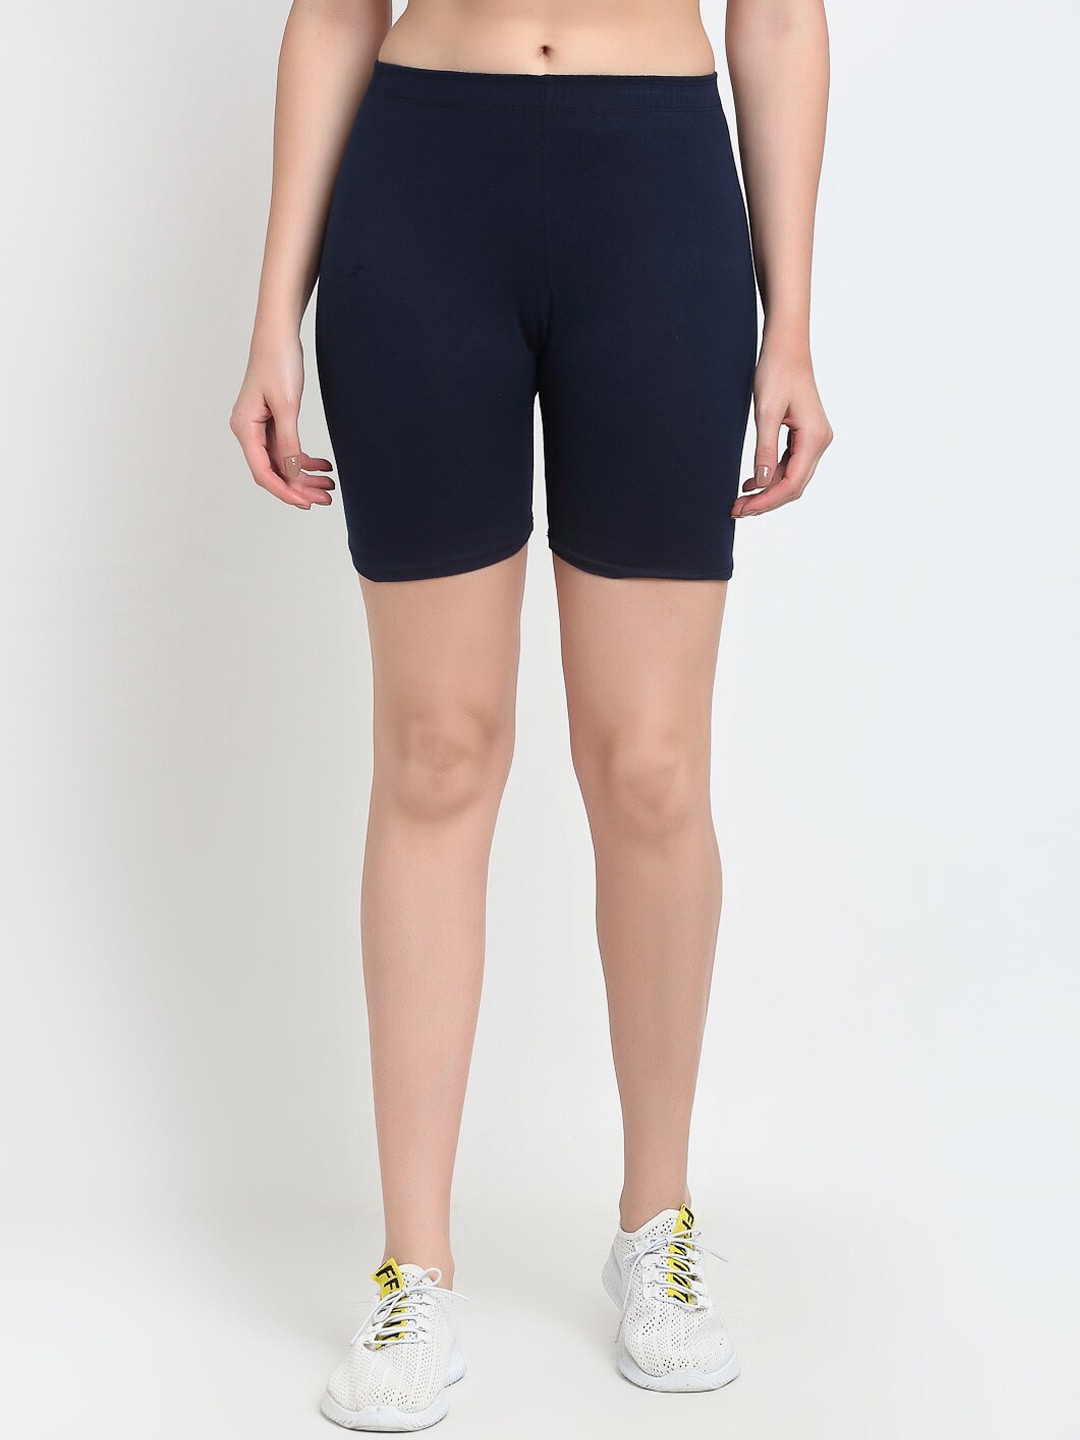 GRACIT Women Navy Blue Cycling Sports Short Price in India